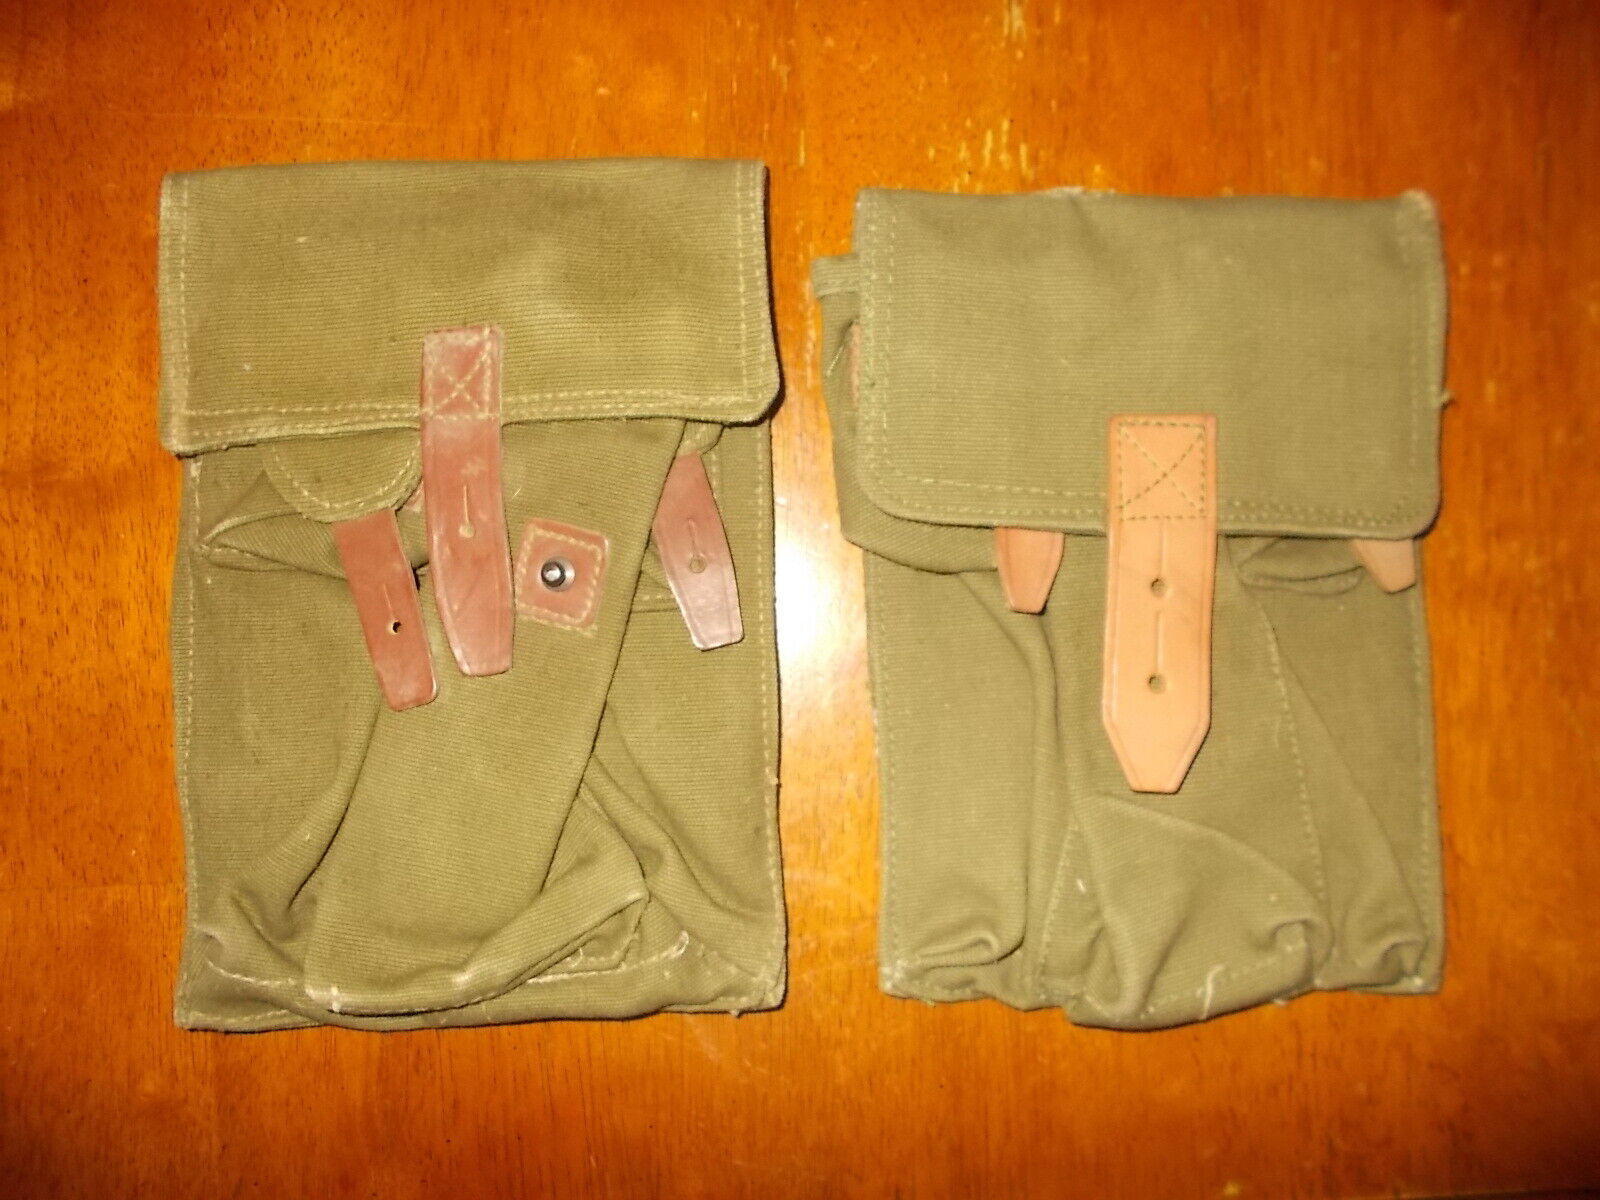 Romanian 3 Cell 7.62x39 Mag Pouch - Surplus Very Good Condition